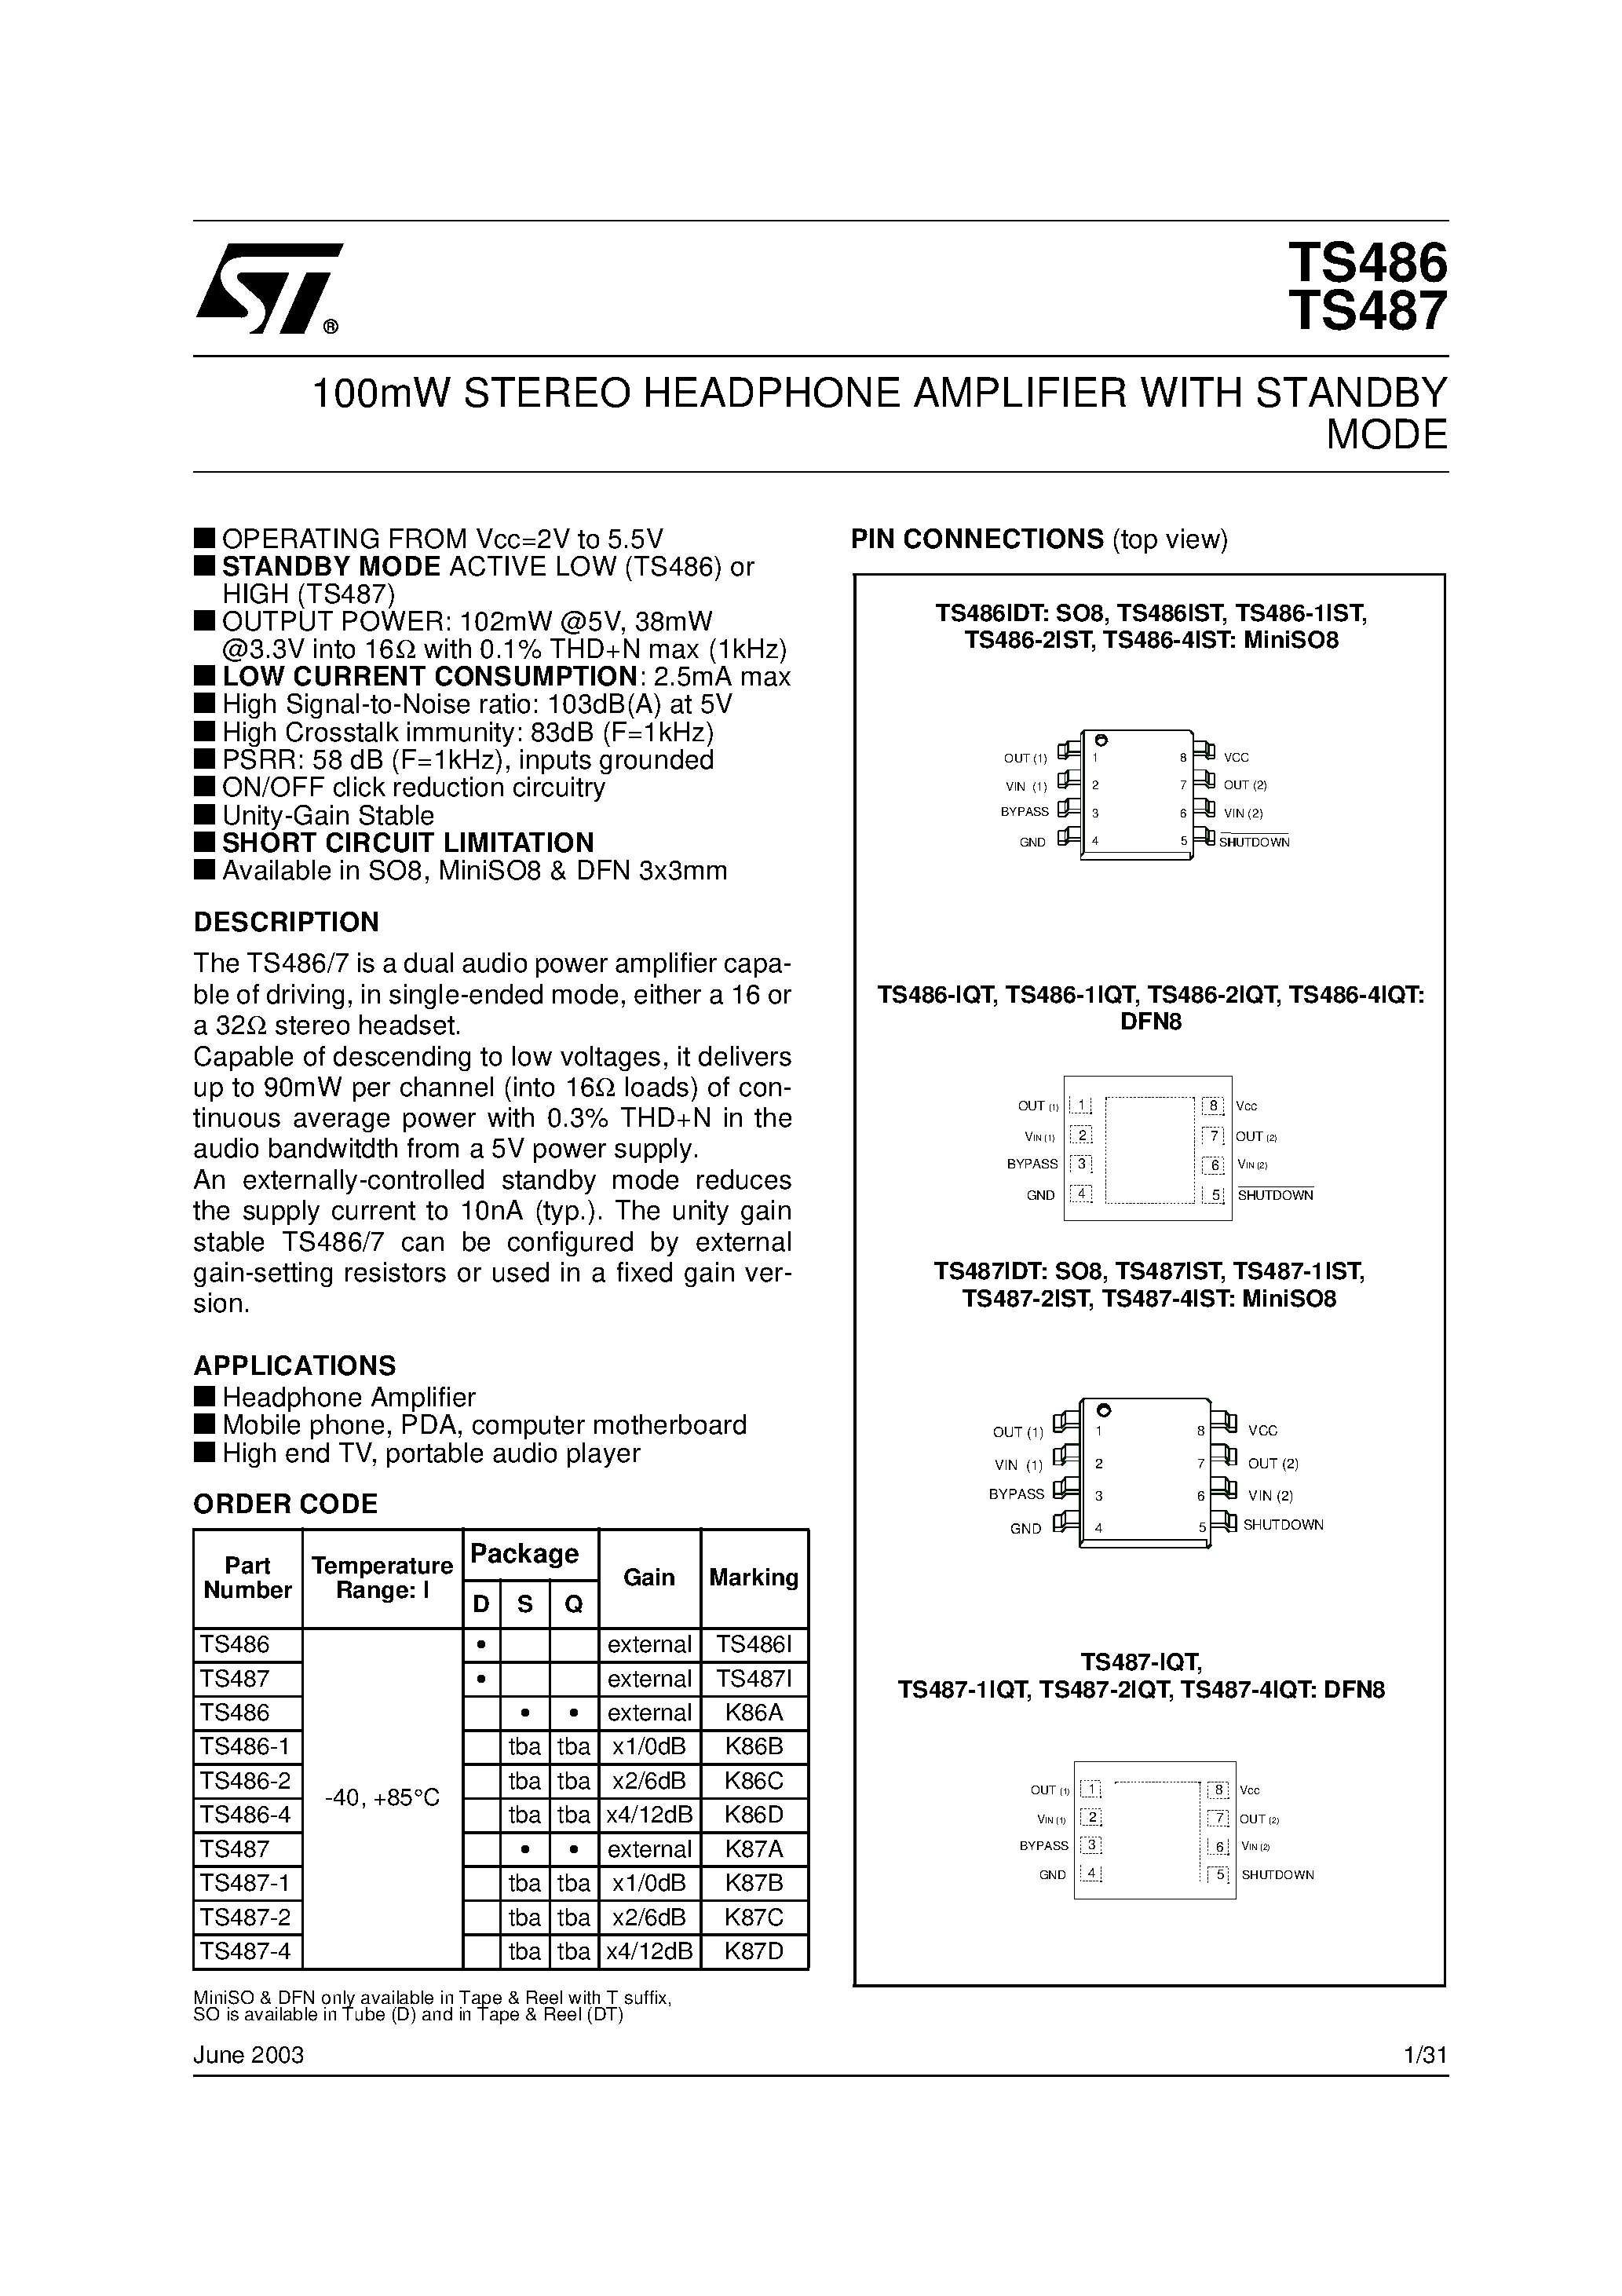 Datasheet TS486-2 - 100mW STEREO HEADPHONE AMPLIFIER WITH STANDBY MODE page 1